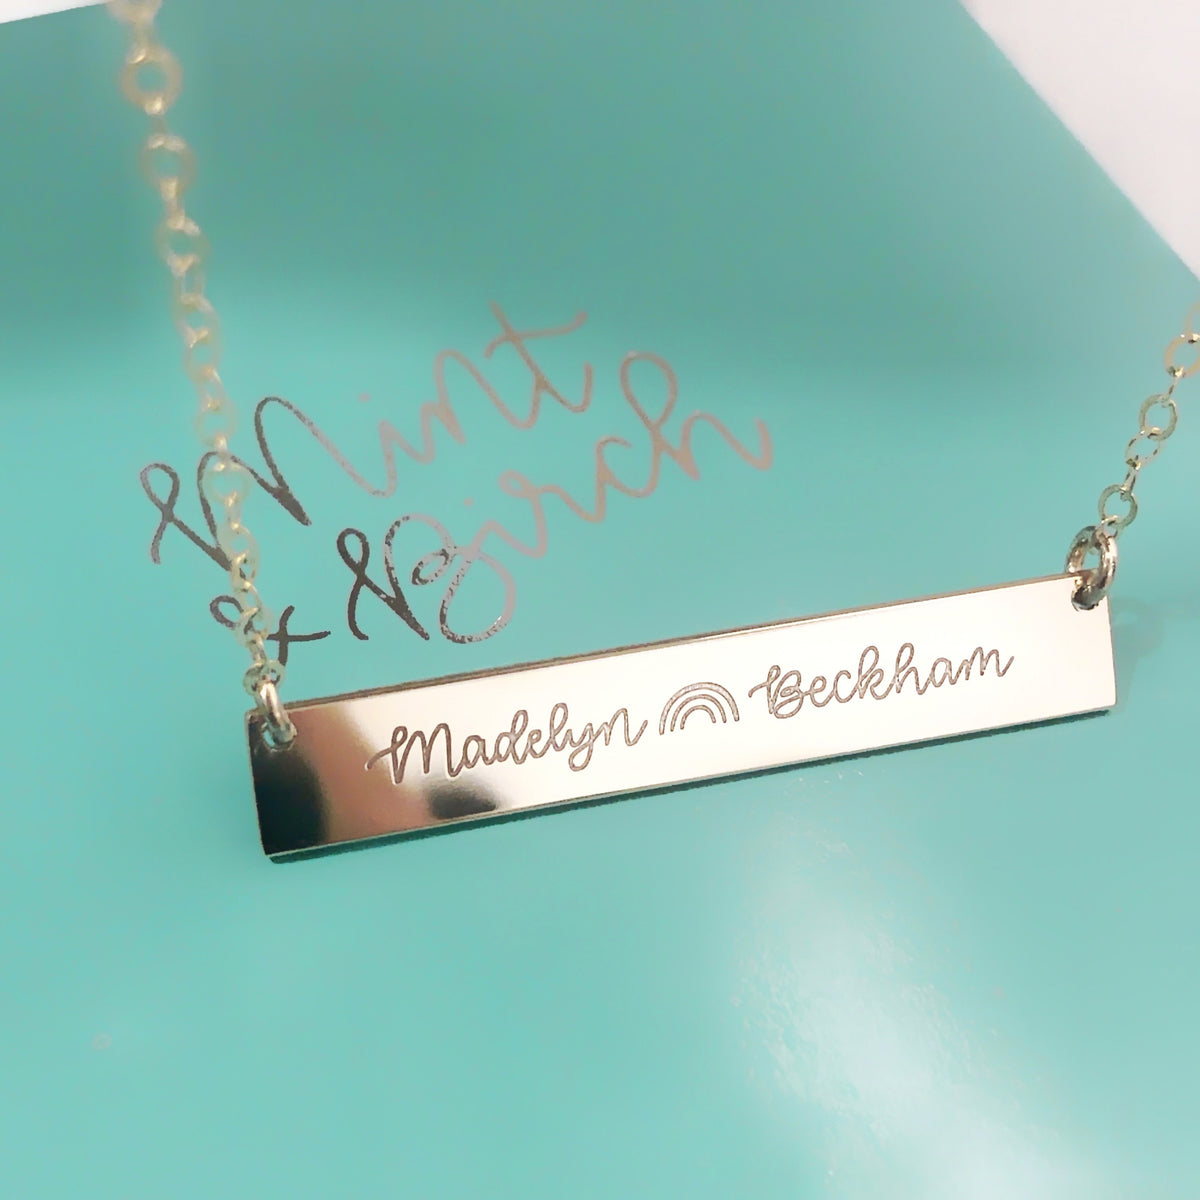 PROOF: Hand Lettered Necklace